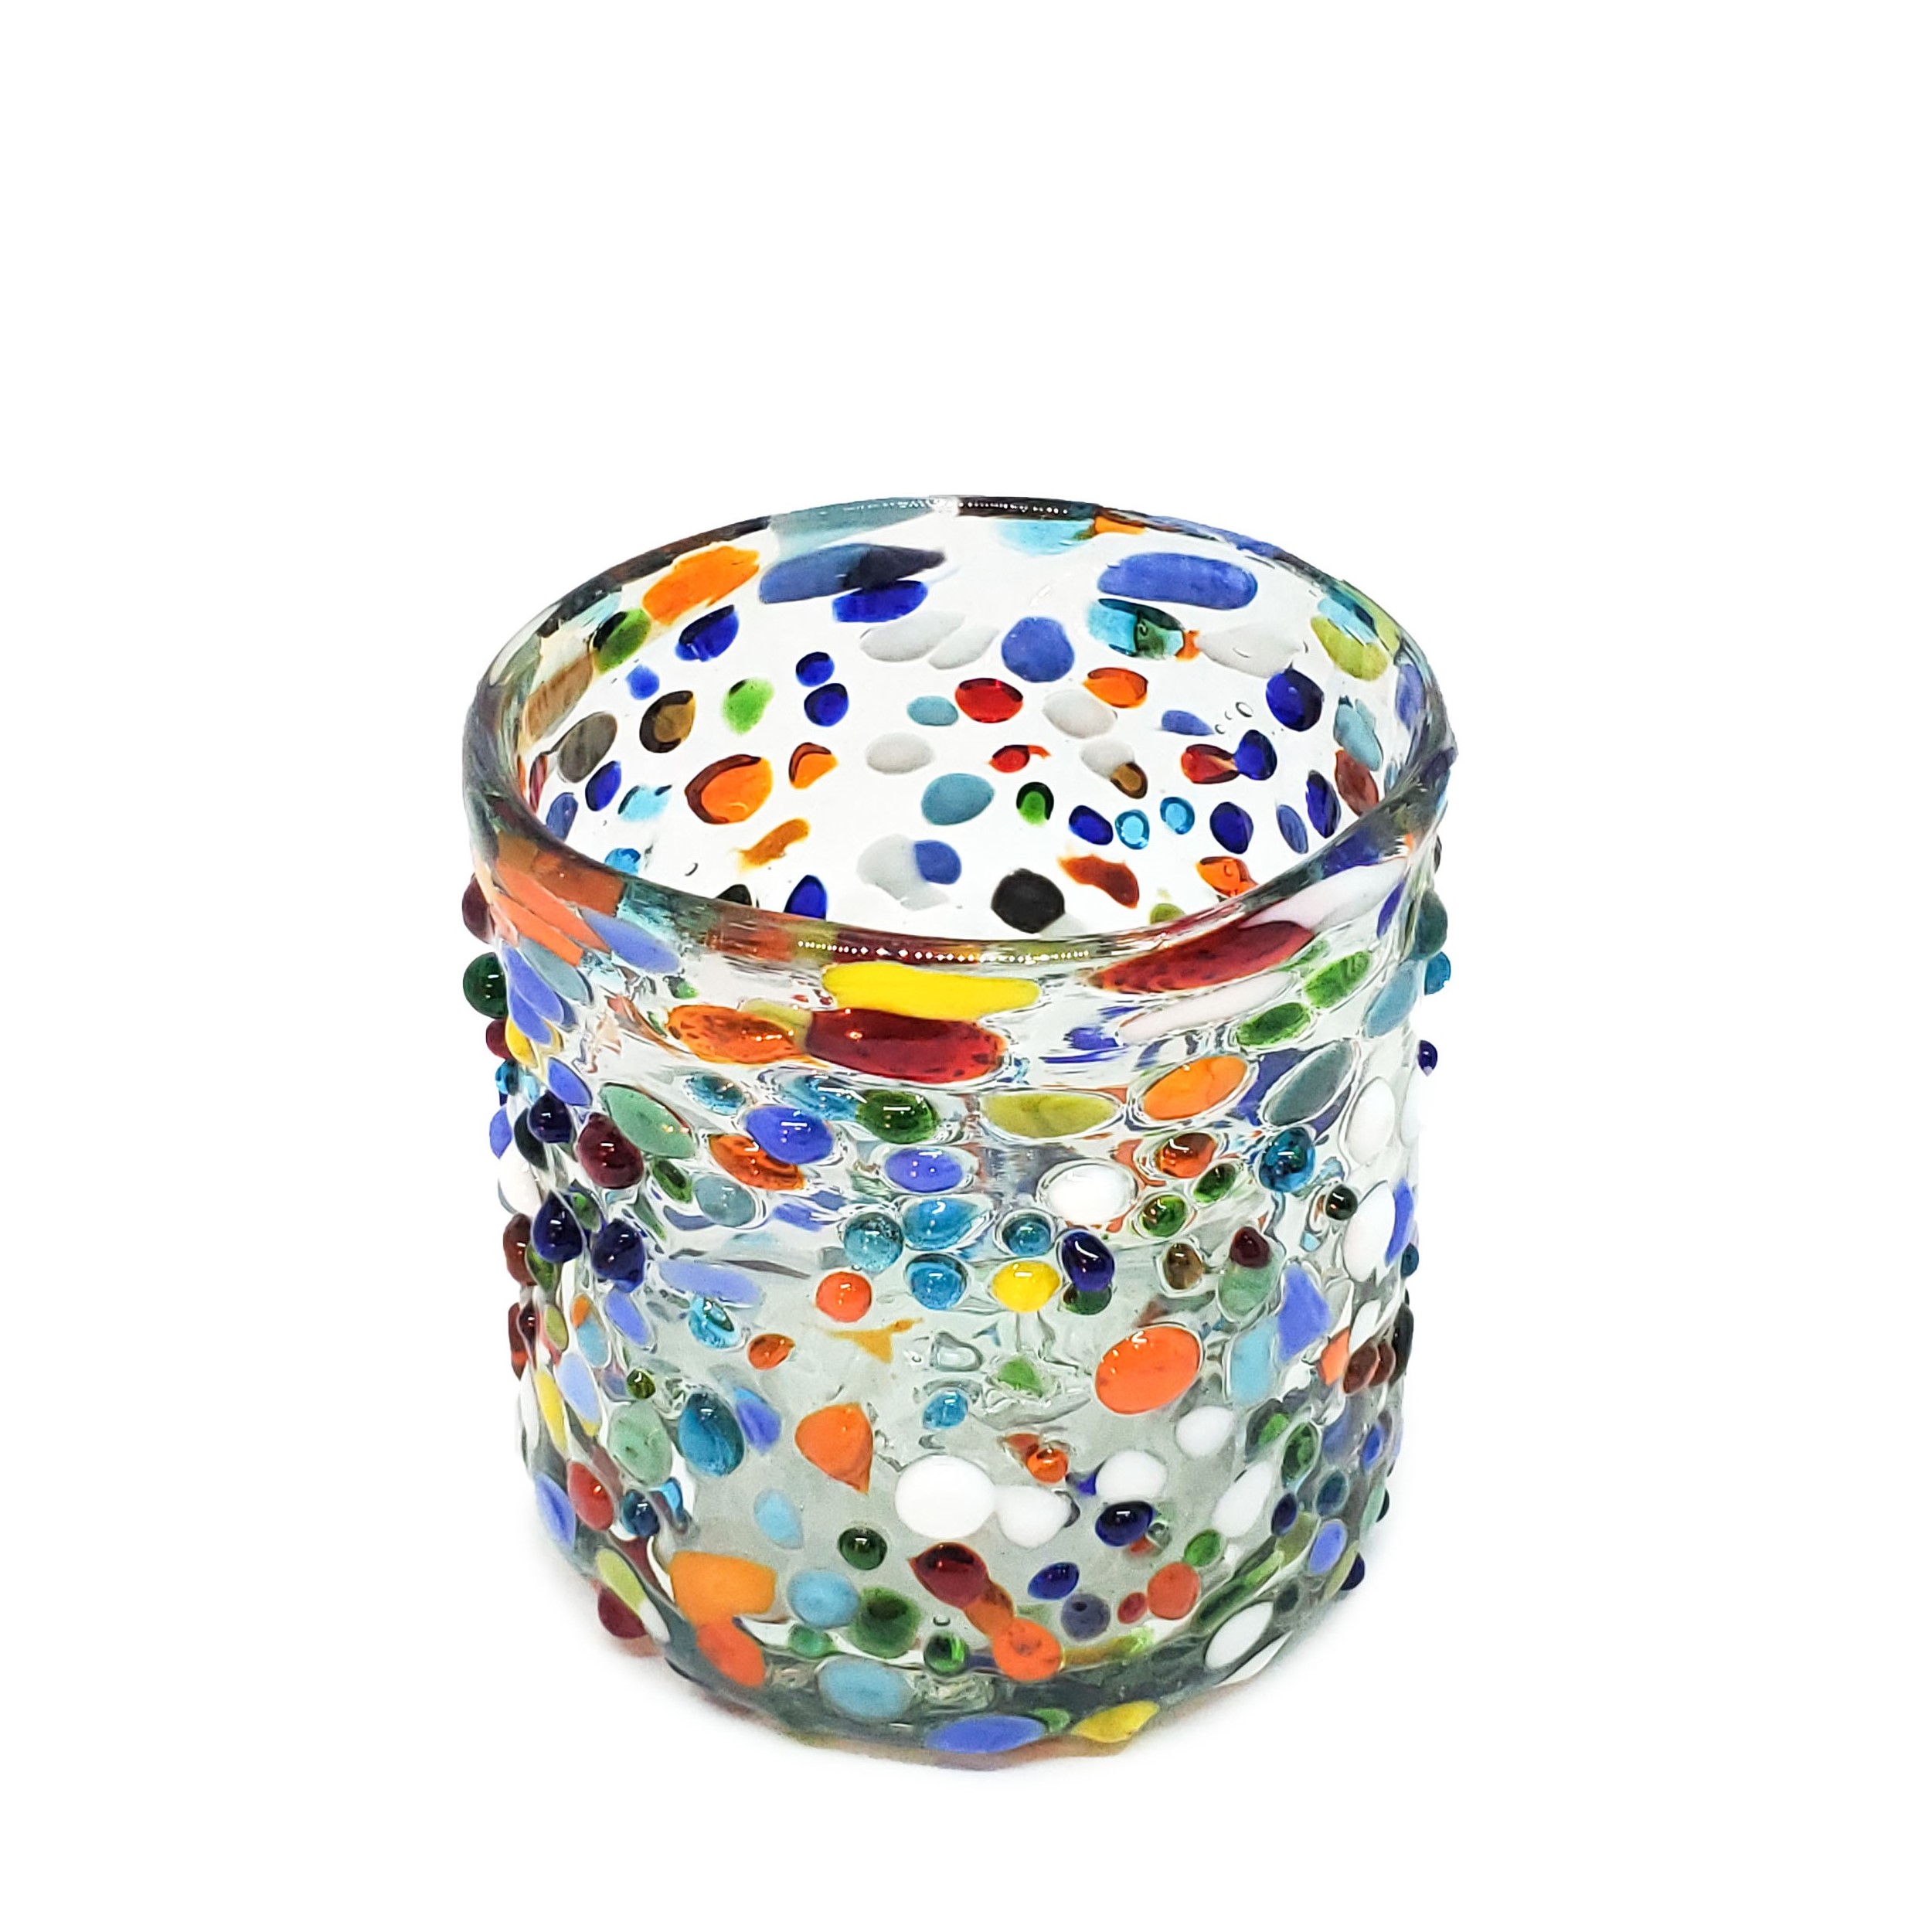 Sale Items / Confetti Rocks 8 oz DOF Rocks Glasses (set of 6) / Let the spring come into your home with this colorful set of glasses. The multicolor glass rocks decoration makes them a standout in any place.